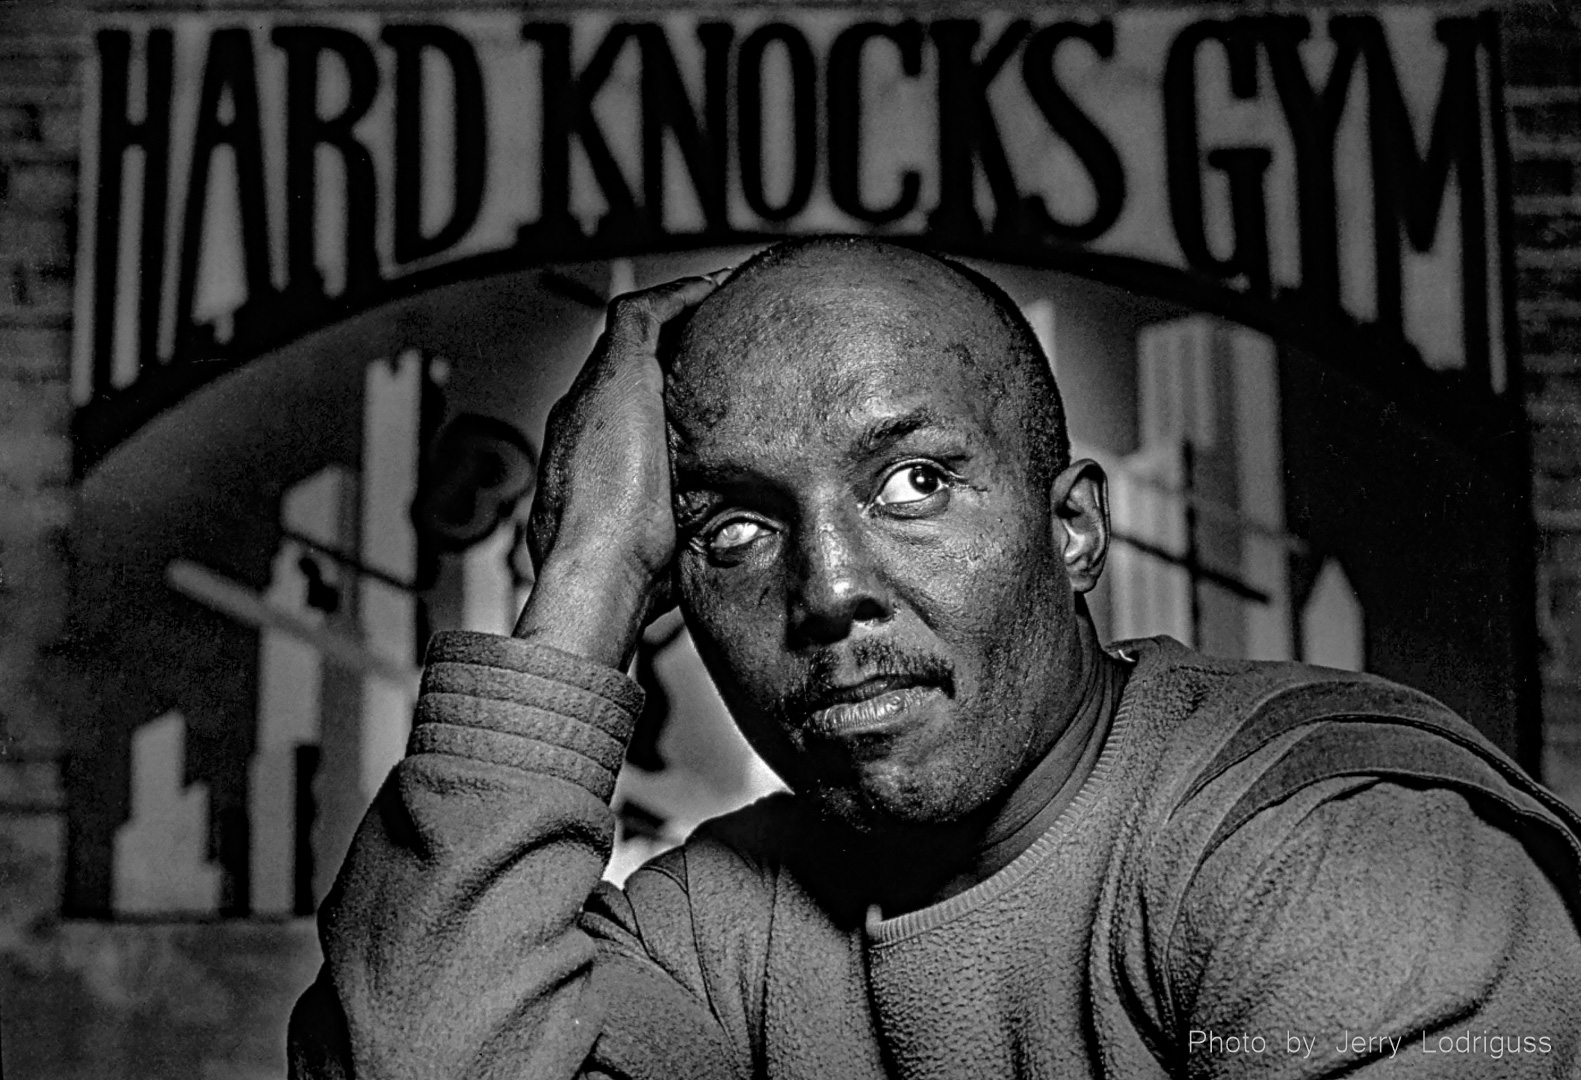 Gypsy Joe Harris poses for a portrait at the Hard Knocks Gym in Philadelphia in 1989. Harris, legally blind in his right eye from an injury he suffered in a street fight at age 11, was 43 years old when this photo was taken. He was out of boxing for 20 years, since the day the Pennsylvania State Athletic Commission decided to ban him from boxing forever because he was blind in one eye. Harris, who built up a record of 24 wins and 1 loss and made the cover of Sports Illustrated, was one of Philadelphia's most popular boxers. In the years since he was forced to stop boxing, Harris beat addictions to heroin and alcohol, and survived three heart attacks.